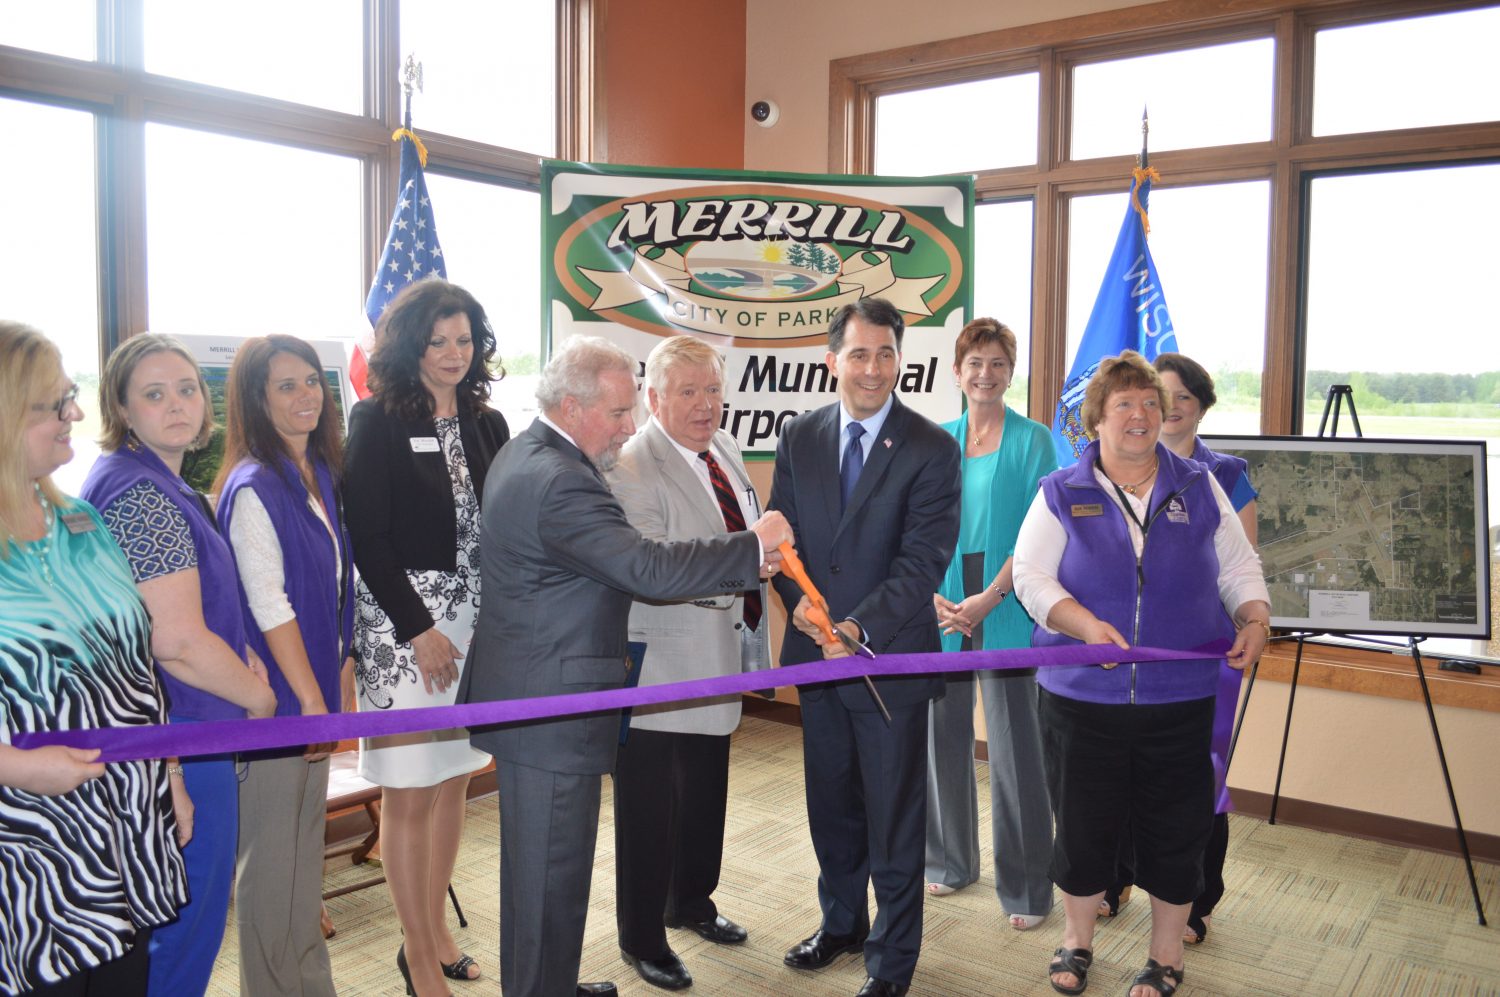 Governor Walker celebrates infrastructure investment at new Merrill Municipal Airport terminal